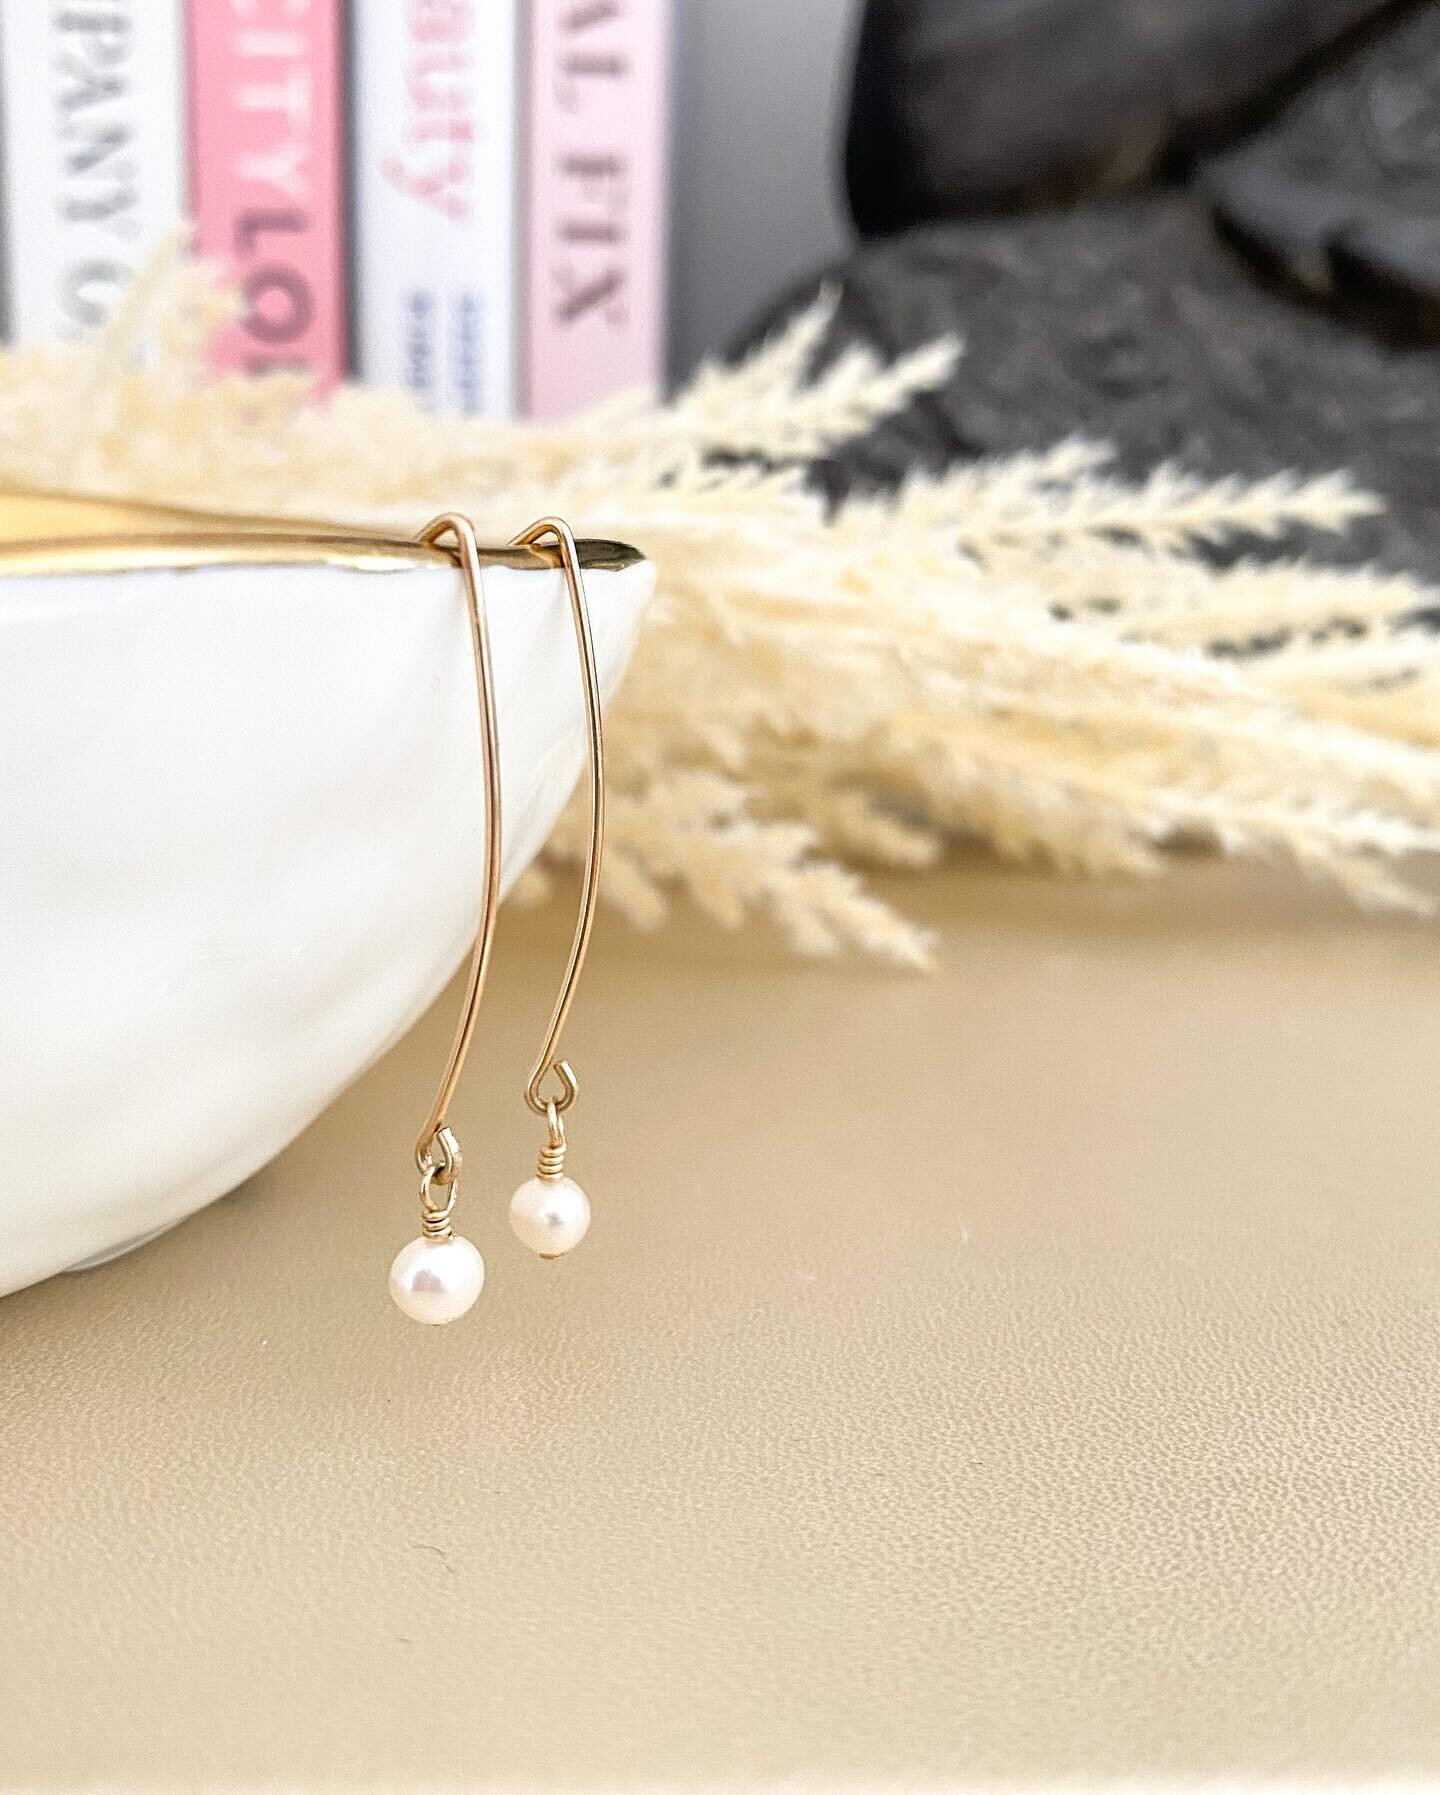 I finally decided to just jump in and begin! Adding earrings to the Just Good Juju family! 🩷😁 There&rsquo;s just something so lovely about Pearls and Gold! I&rsquo;m wearing mine everyday now. Simple, classic and a lil glam!!!!